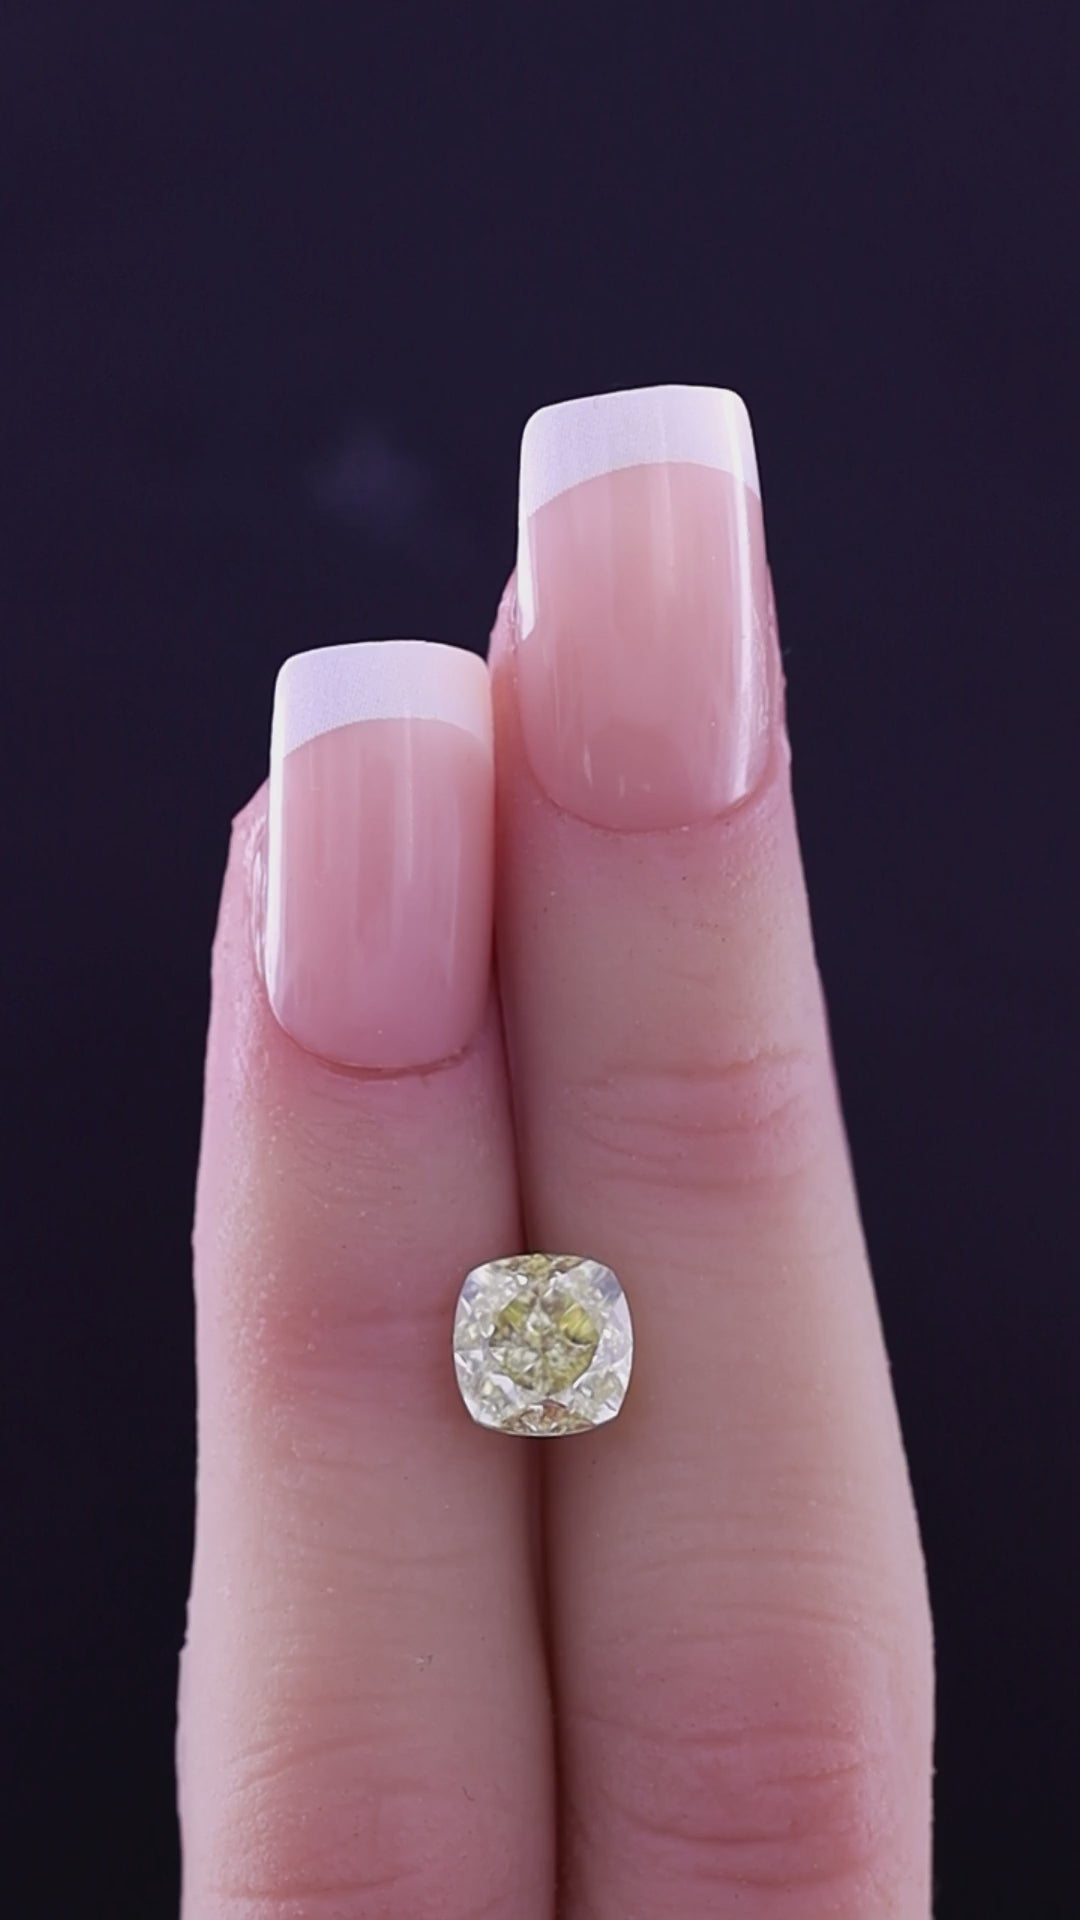 Explore the 2.66-carat Fancy Light Yellow diamond, a stunning gem mined in Botswana and GIA certified. Available in Geneva by special request, this VS2 clarity diamond is a perfect investment opportunity, embodying the beauty and rarity of African nature. Secure this exquisite piece today.